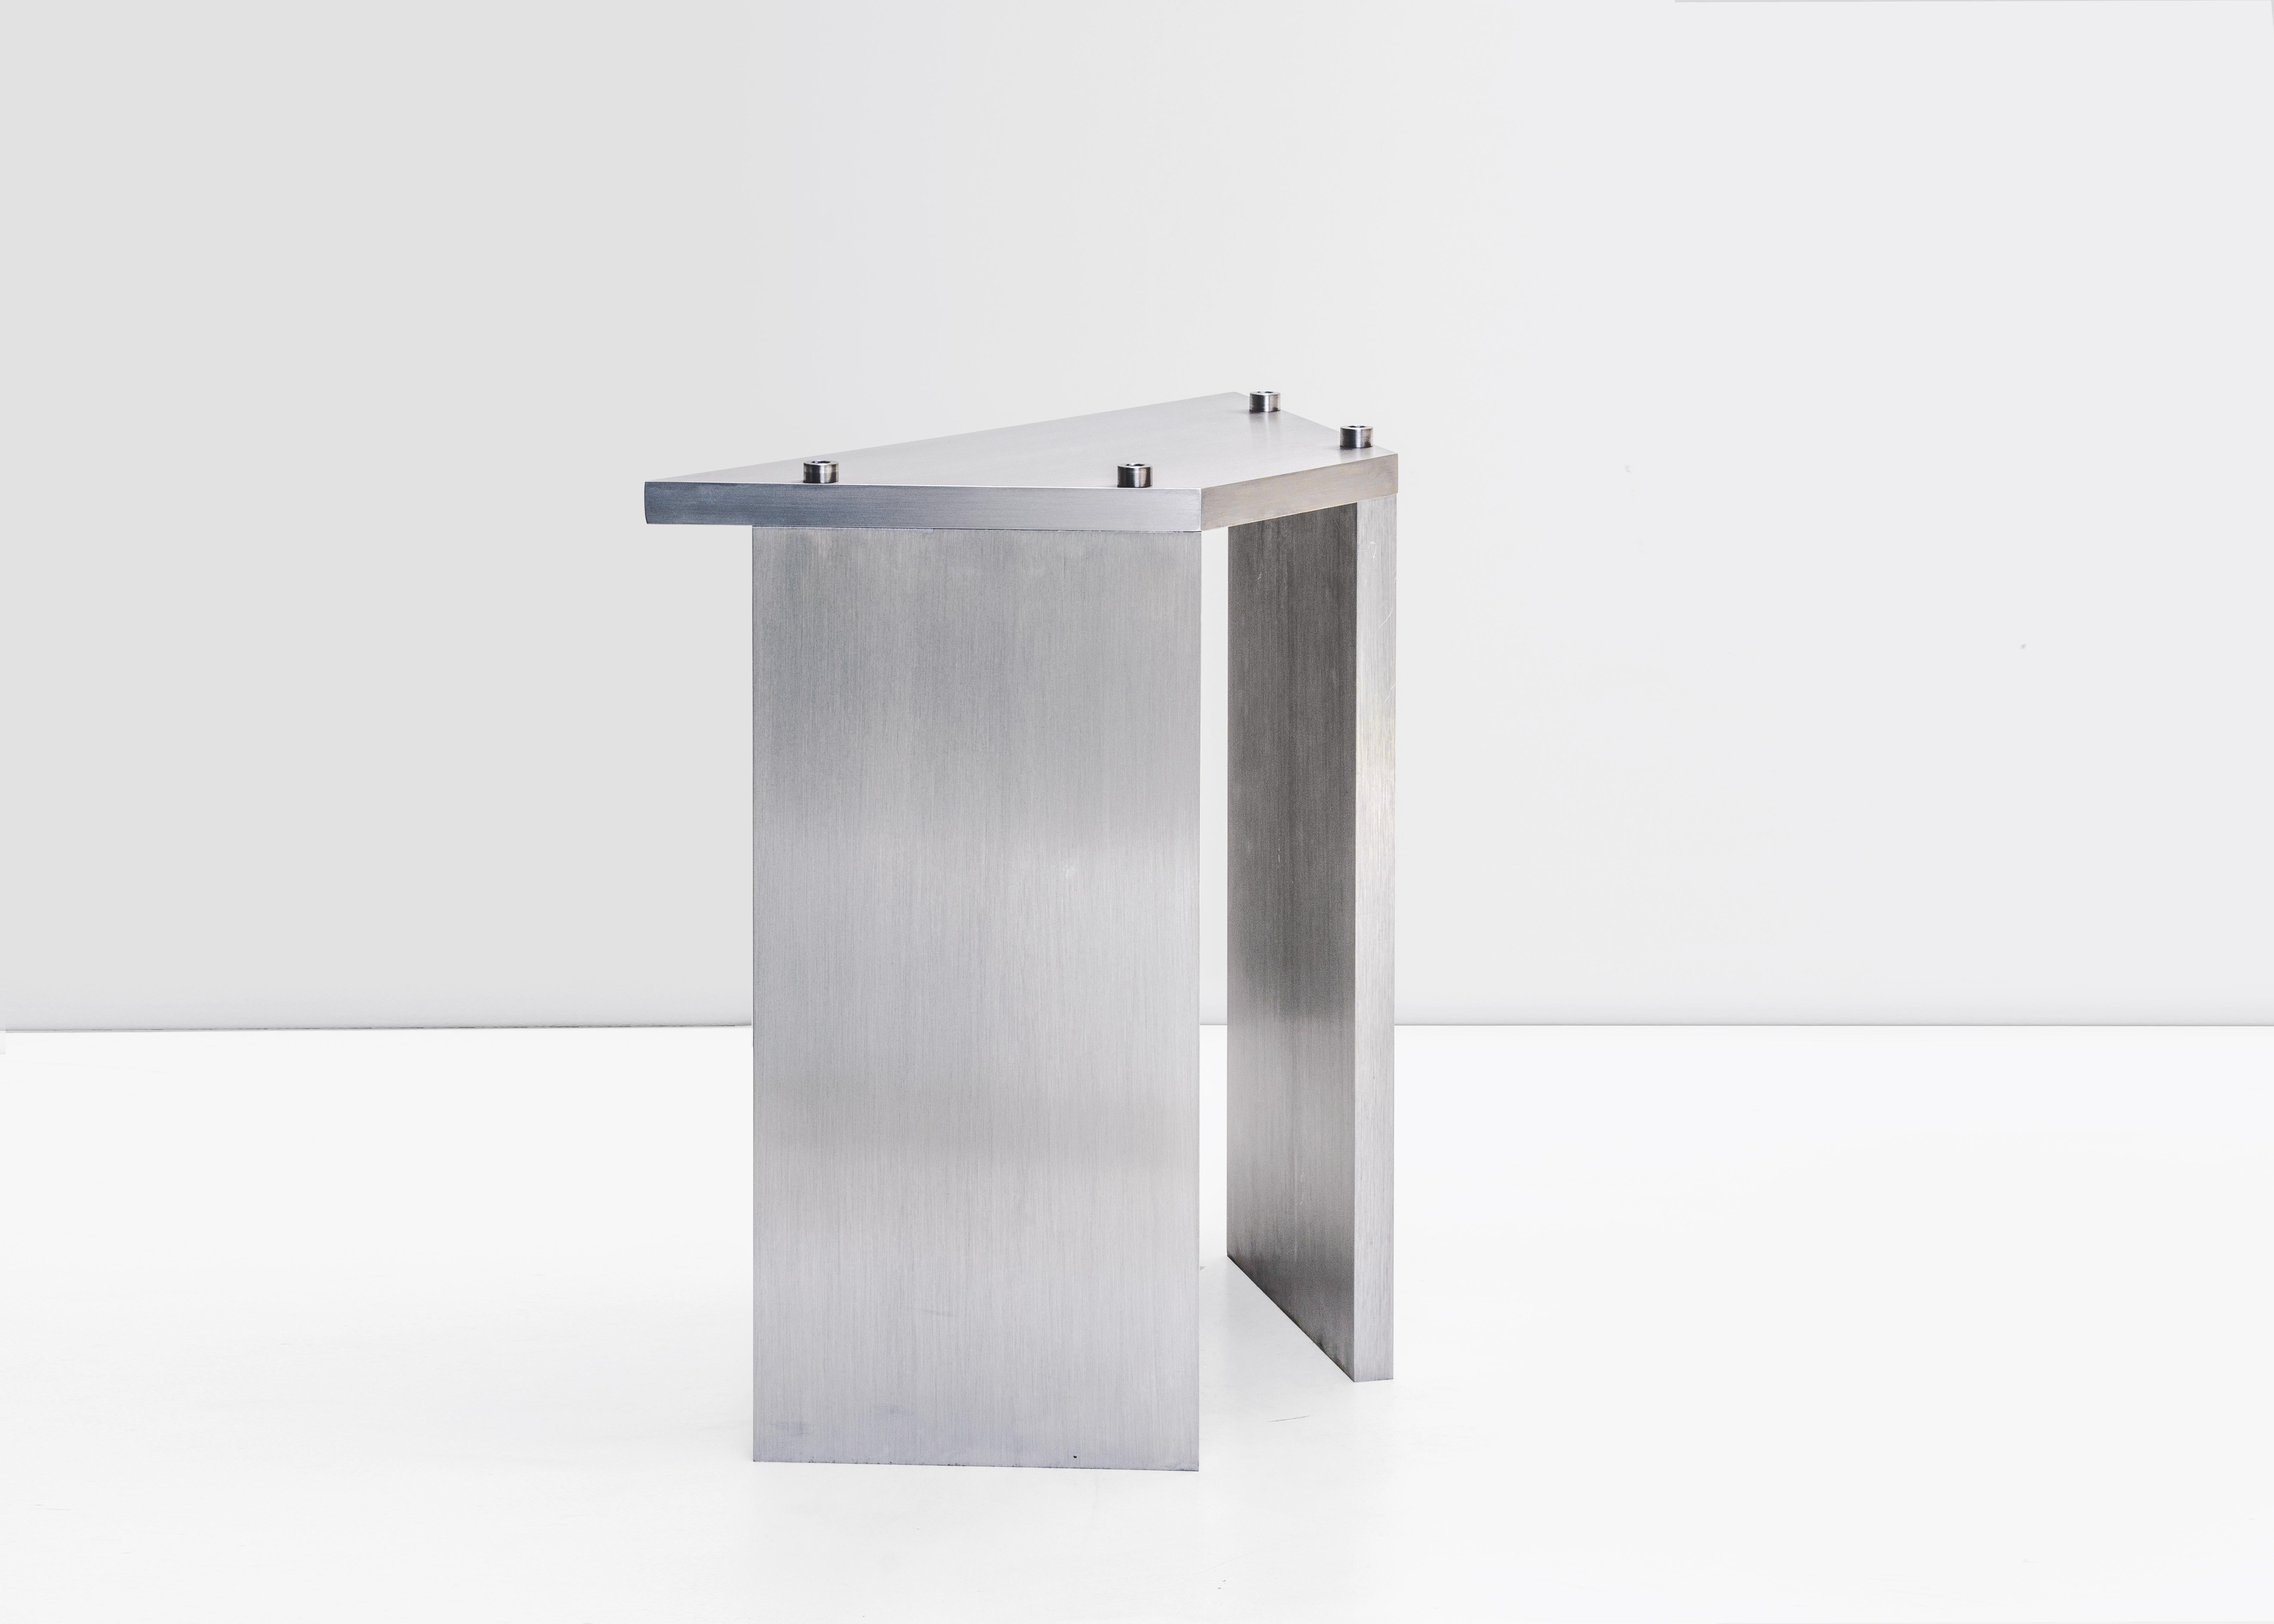 Contemporary stackable stool by Johan Viladrich
Stackable stool
Anodised aluminum,
Stainless steel bolts
Measures: L43 W20 H45 cm
Apprx. 15kg
Limited Edition of 200 + 20AP

The table is composed of two brushed aluminium plates leaning onto